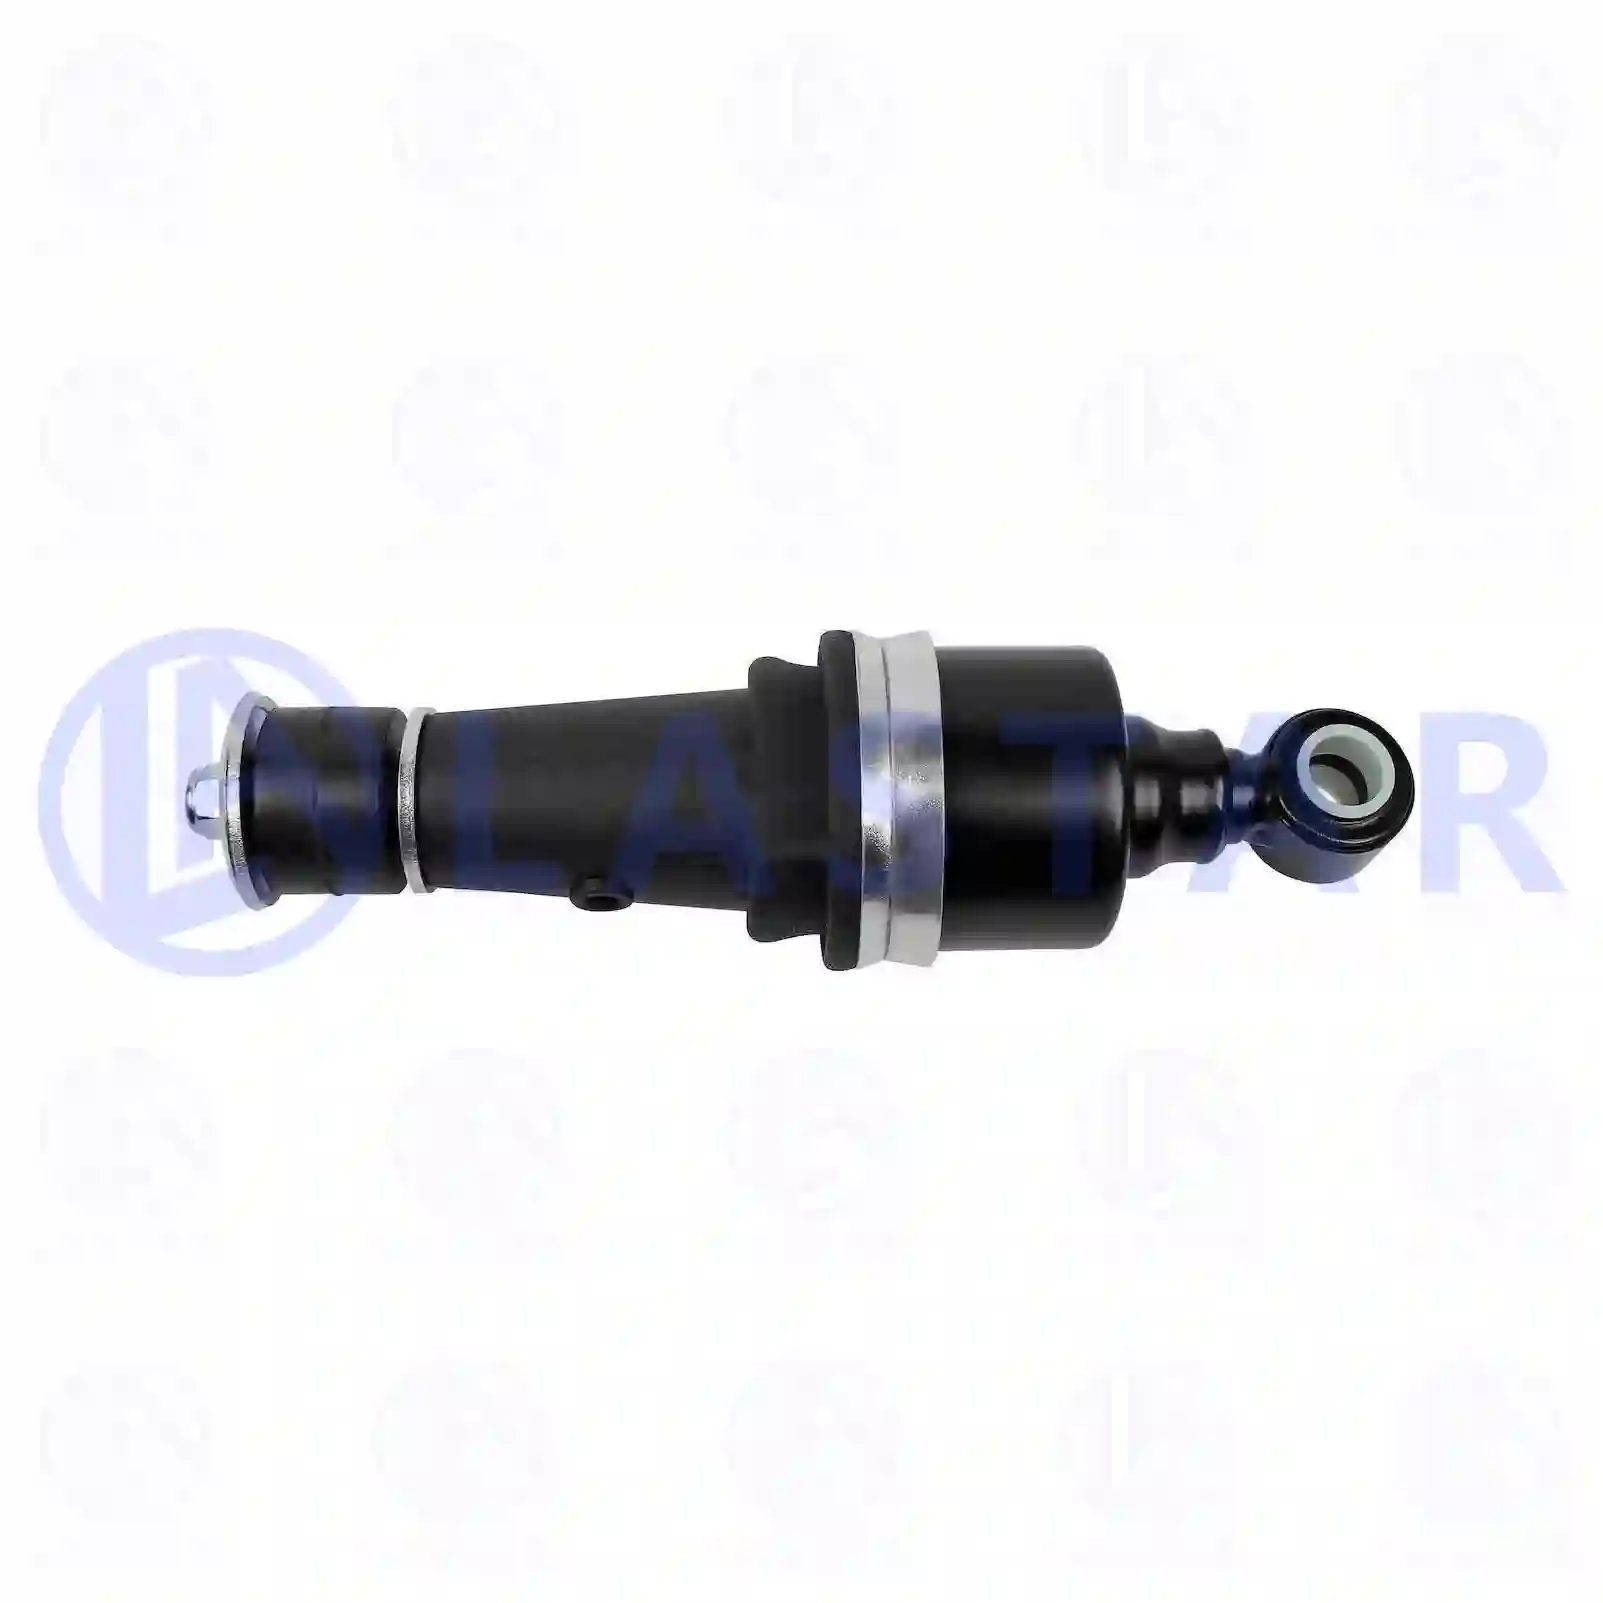 Cabin shock absorber, with air bellow, 77734548, 0375224, 1245580, 1265281, 1285393, 1321590, 1353450, 1353453, 1371065, 1444147, 1622211, 375224, ZG41219-0008 ||  77734548 Lastar Spare Part | Truck Spare Parts, Auotomotive Spare Parts Cabin shock absorber, with air bellow, 77734548, 0375224, 1245580, 1265281, 1285393, 1321590, 1353450, 1353453, 1371065, 1444147, 1622211, 375224, ZG41219-0008 ||  77734548 Lastar Spare Part | Truck Spare Parts, Auotomotive Spare Parts